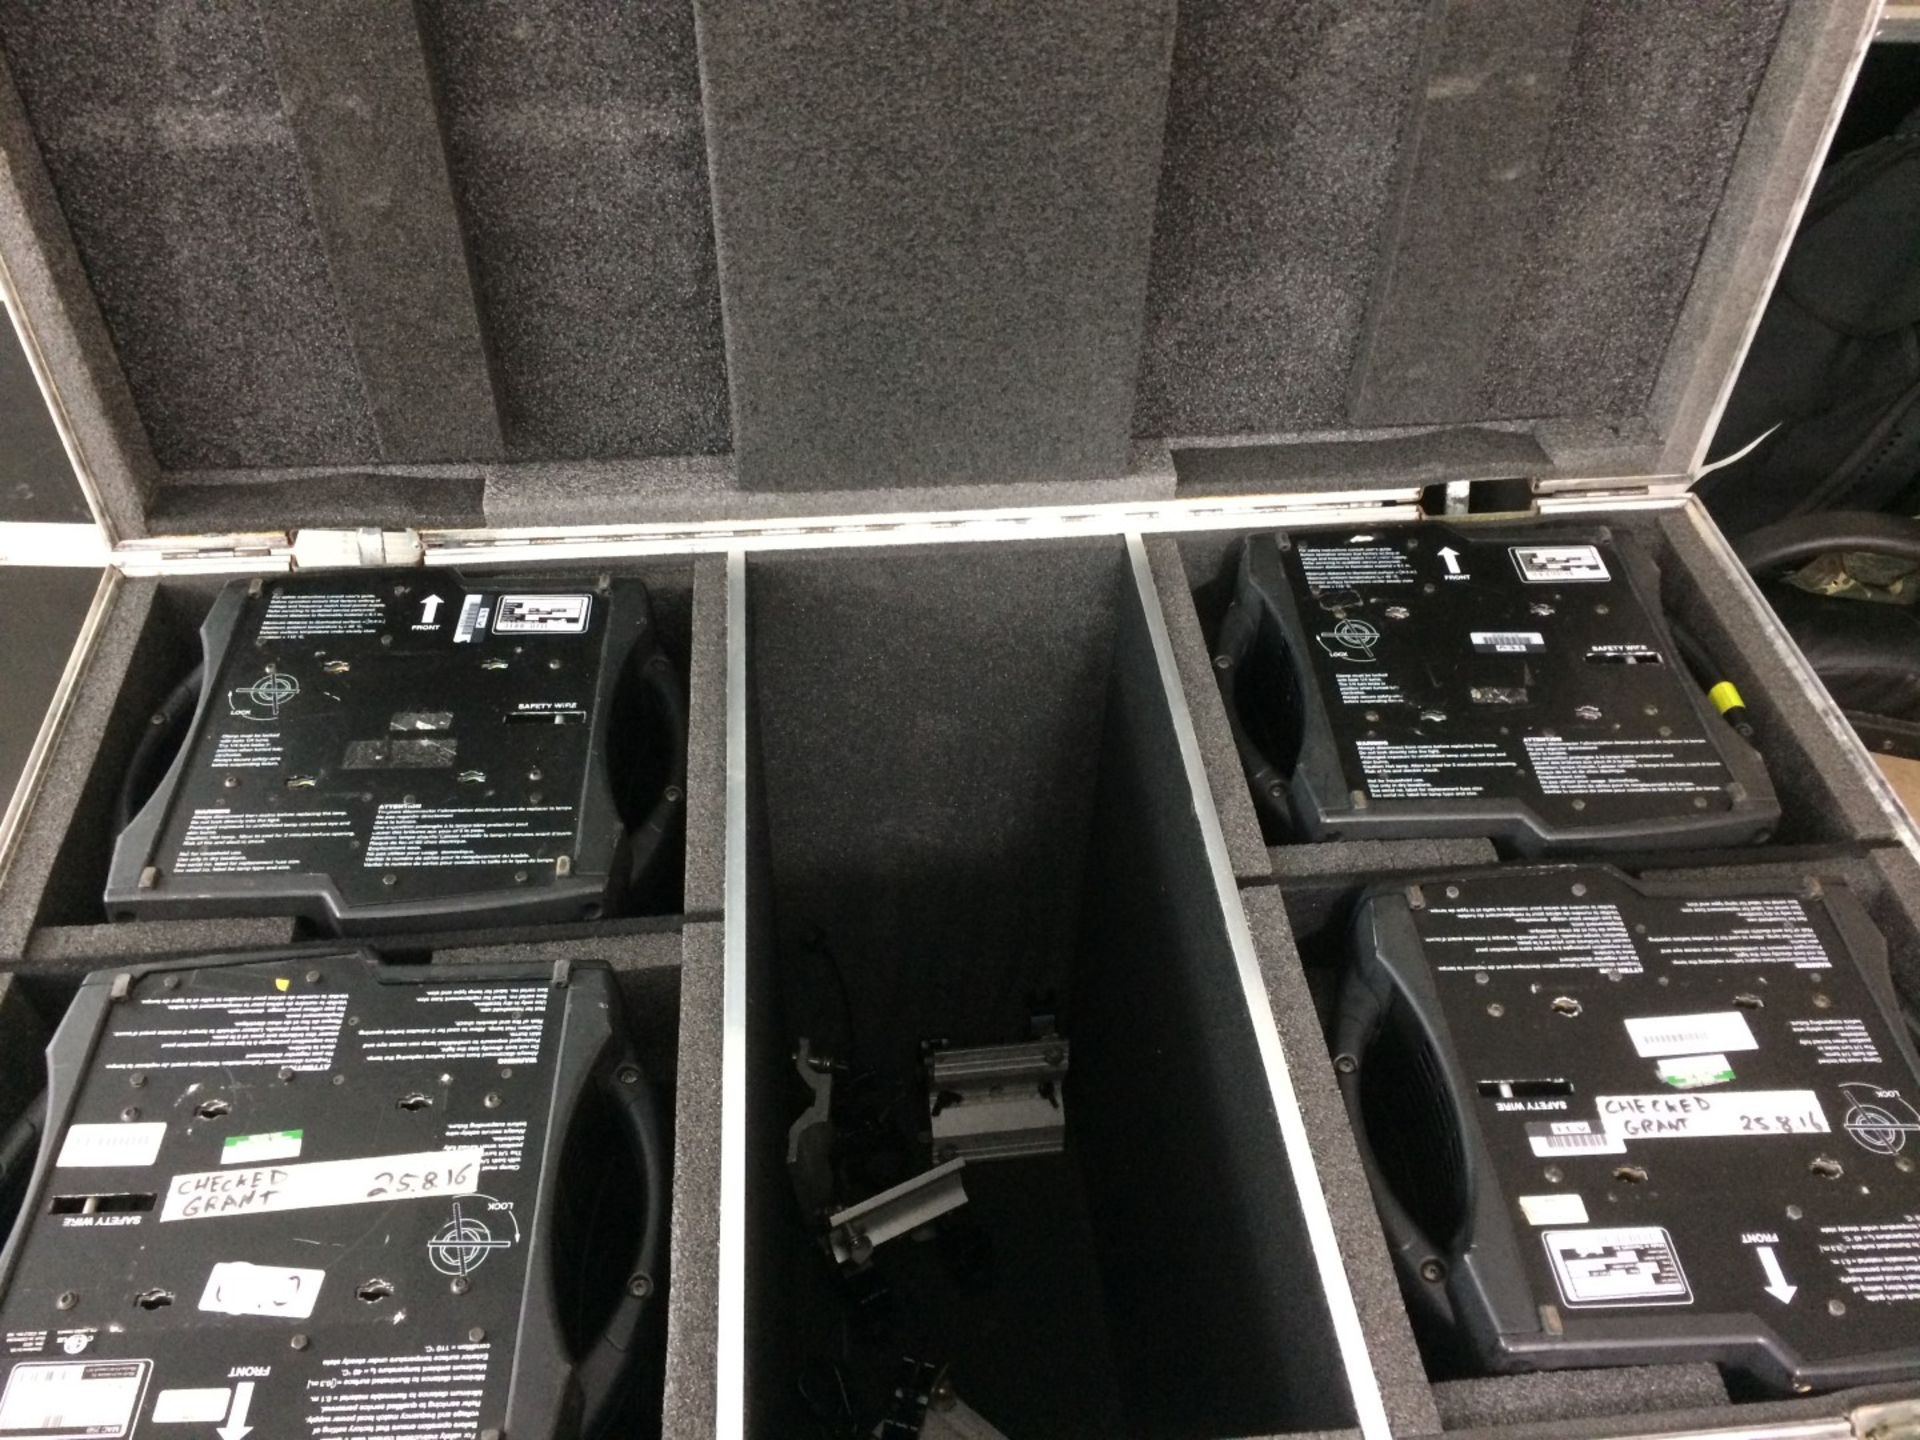 4 x MARTIN MAC 250 SPOTLIGHTS In Flight Case With OMEGA CLAMPS And SAFETY CHAINS - Ref: 784 - - Image 2 of 2